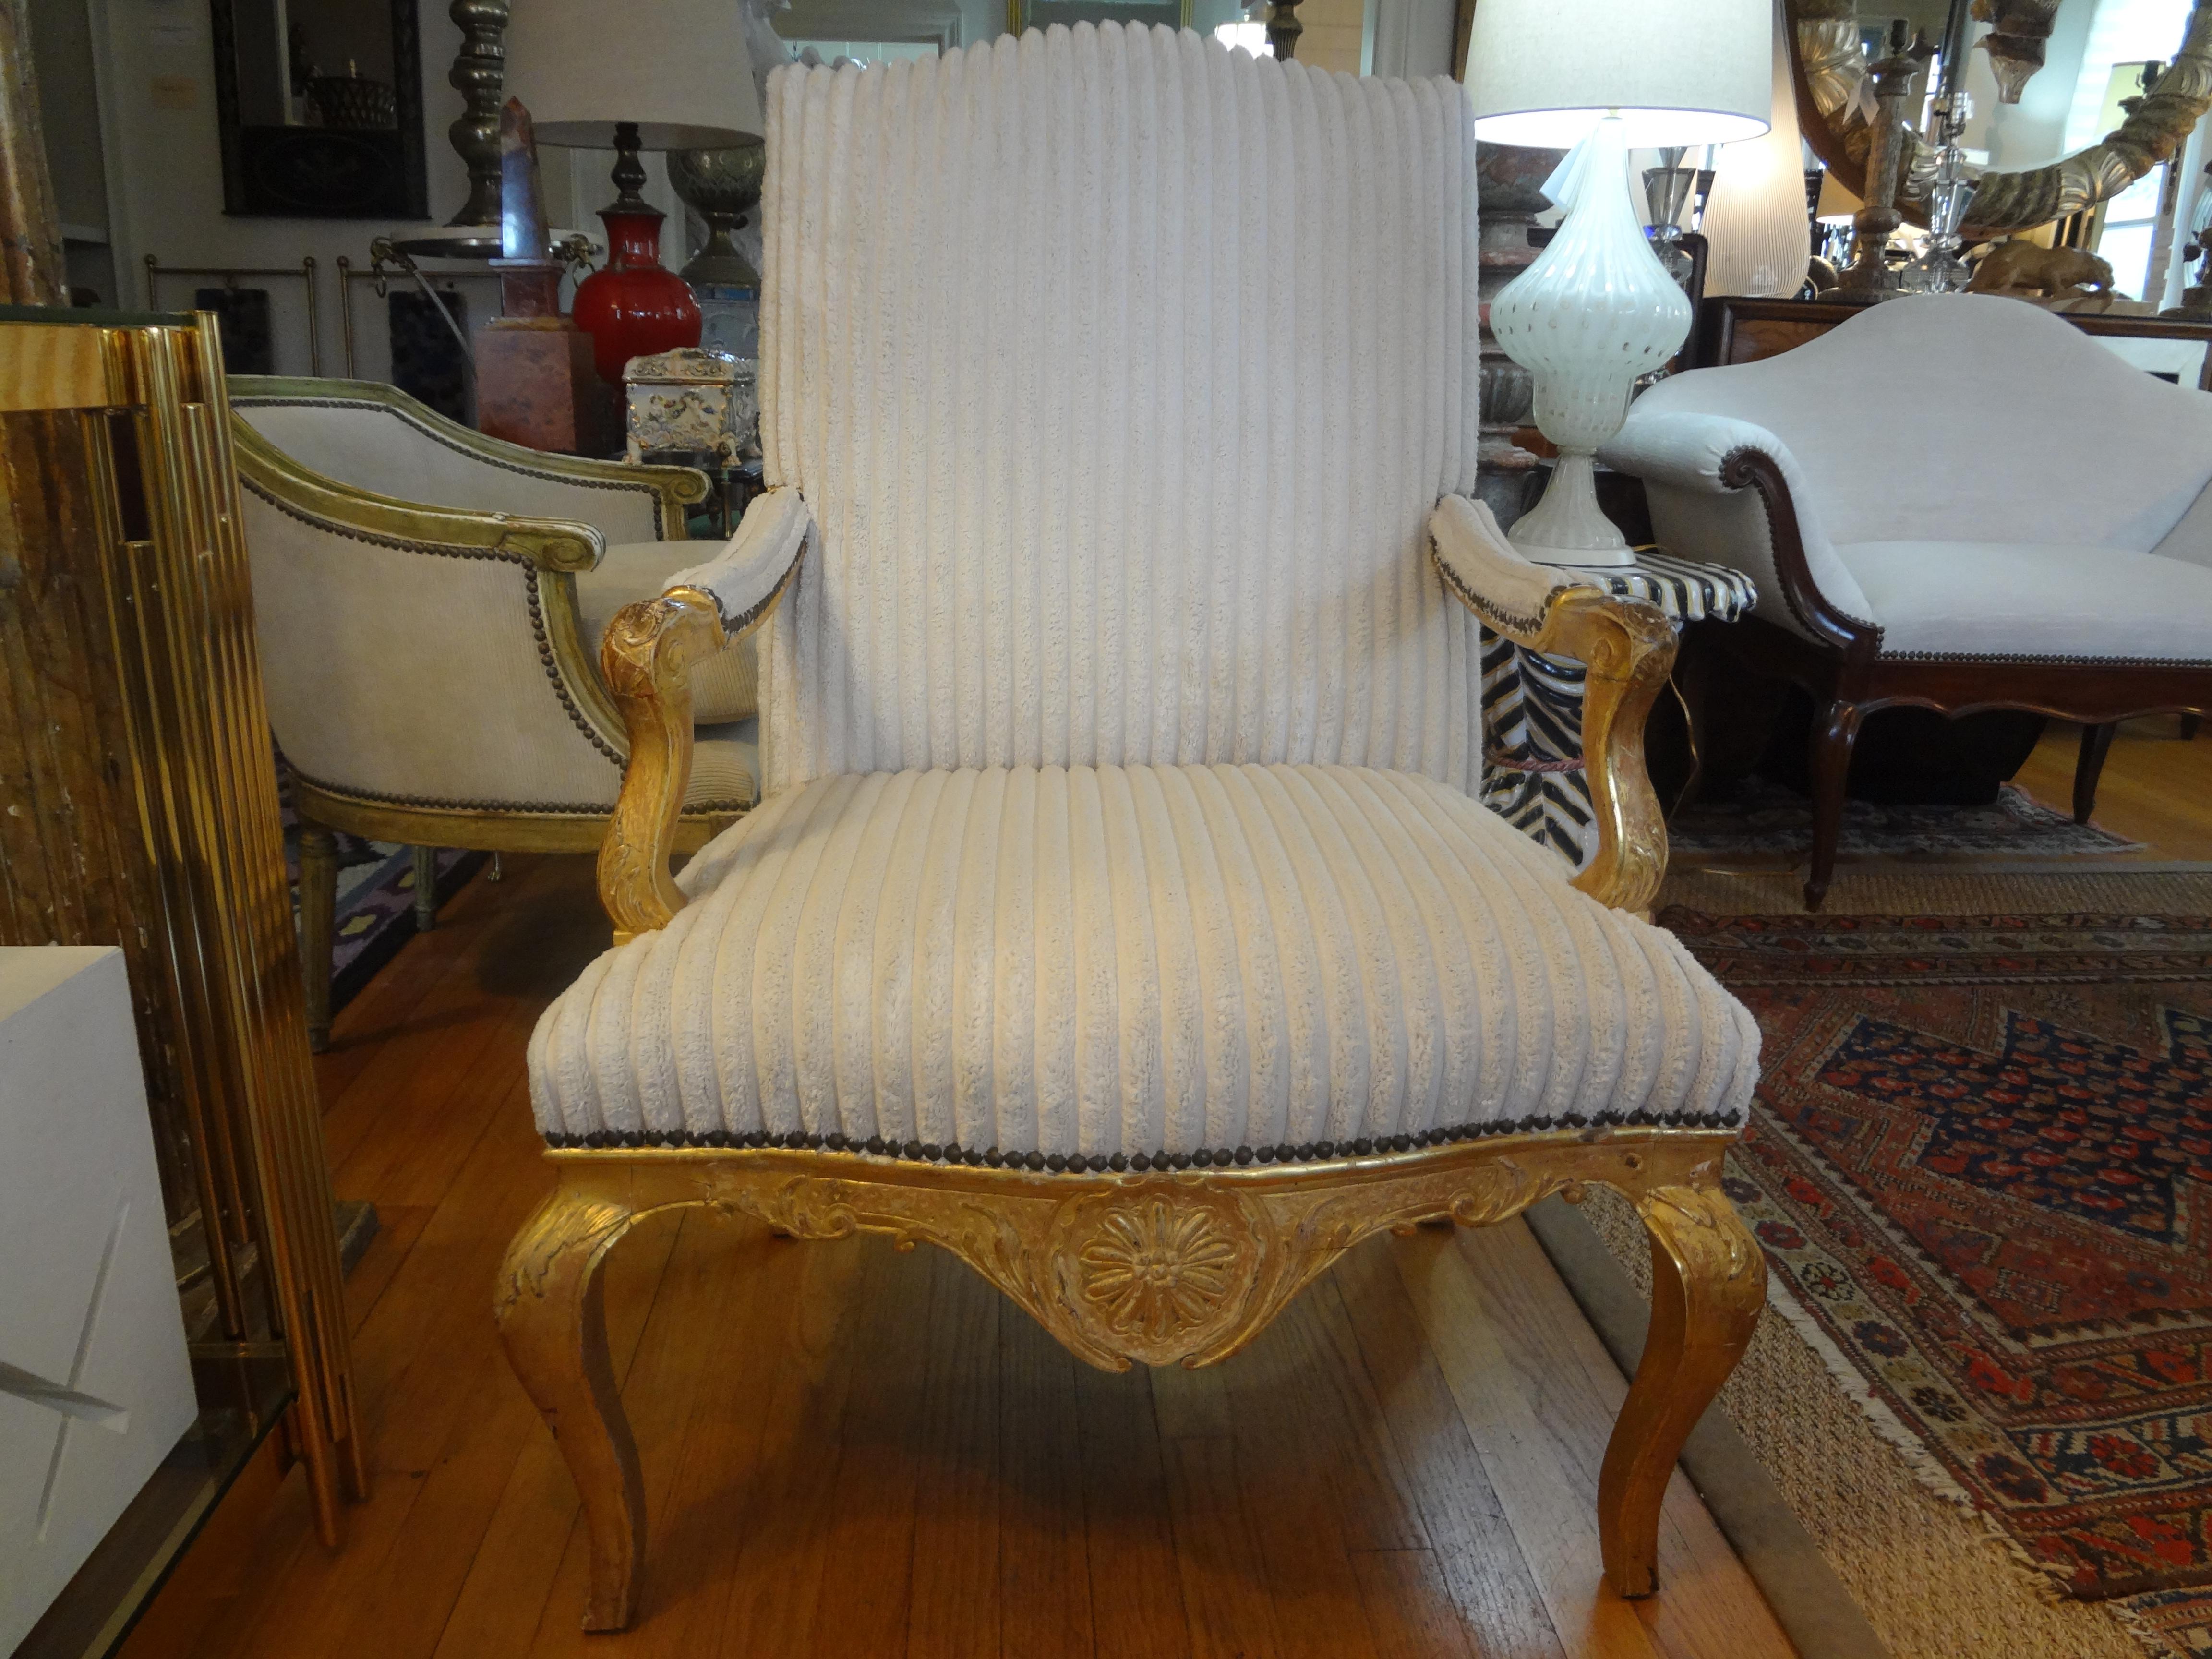 18th Century French Régence Giltwood Chair.
Stunning signed period 18th century French Regence giltwood fauteuil, armchair or side chair. This beautiful gilt wood chair has gorgeous carving, an unusual center medallion and fabulous patina. This